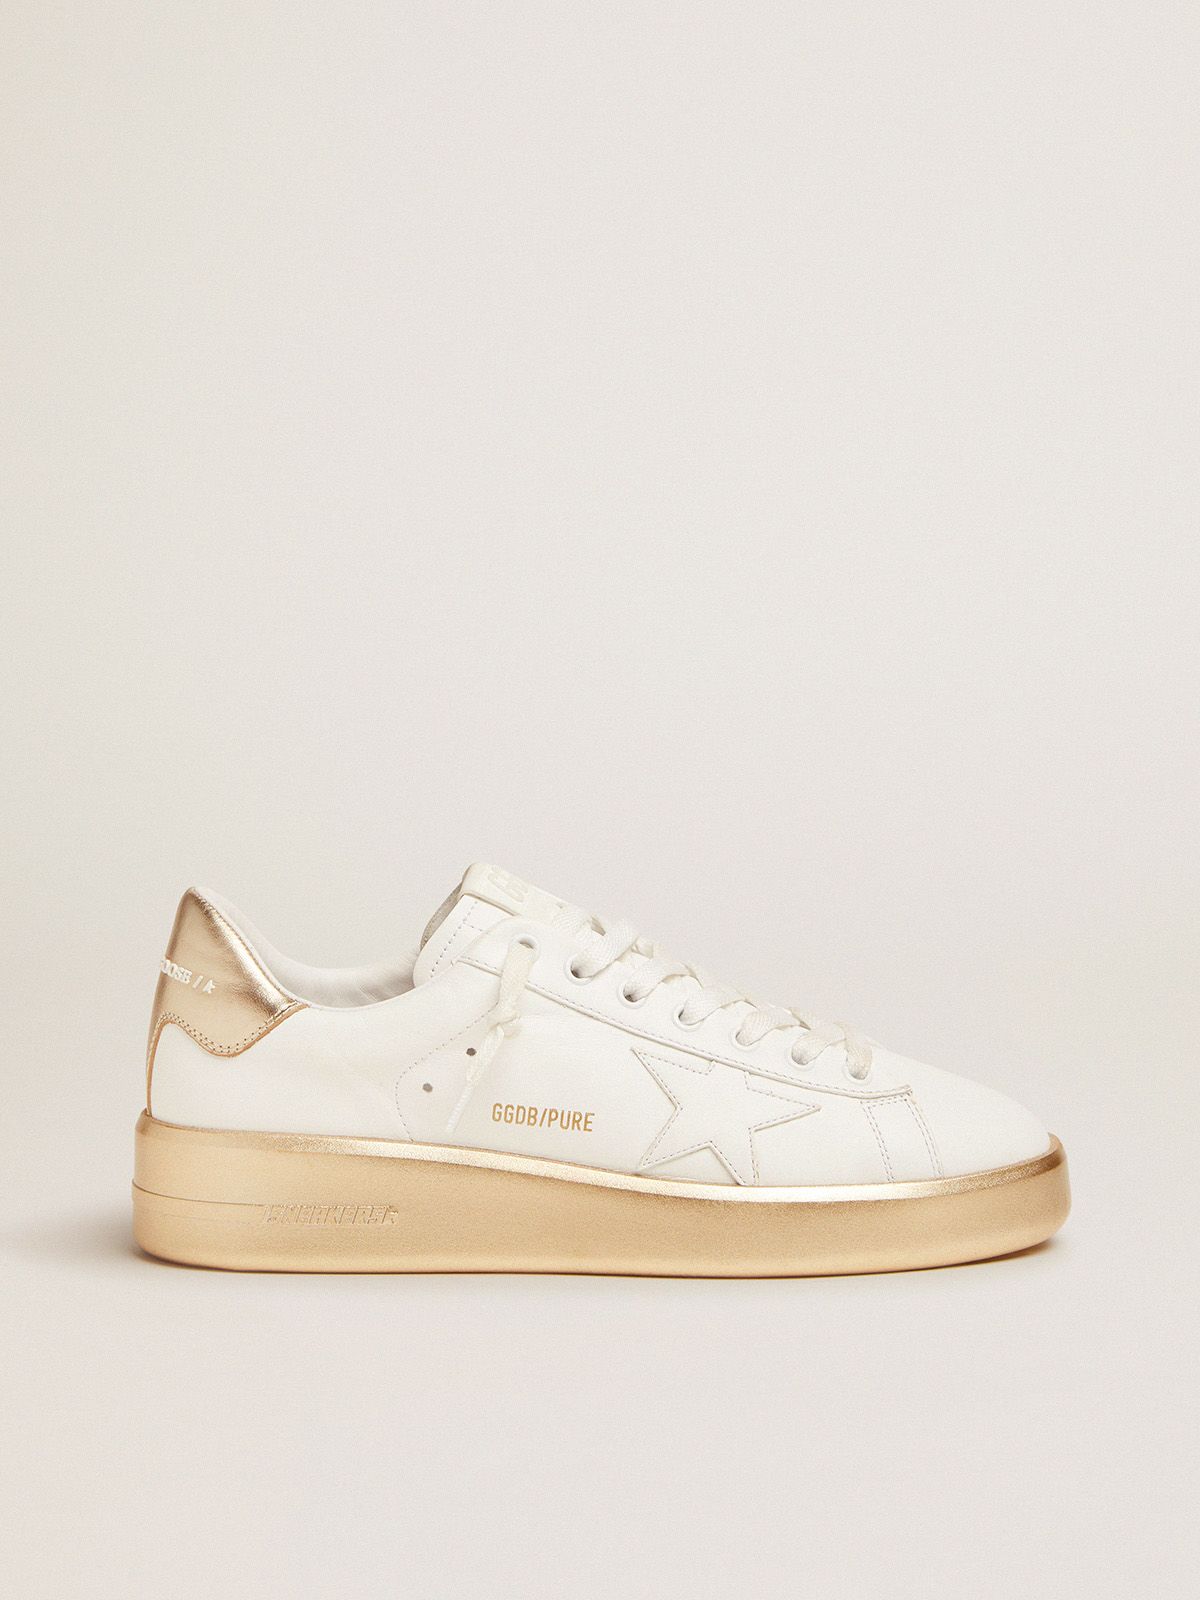 golden goose in white leather tab gold Purestar with foxing and sneakers heel laminated